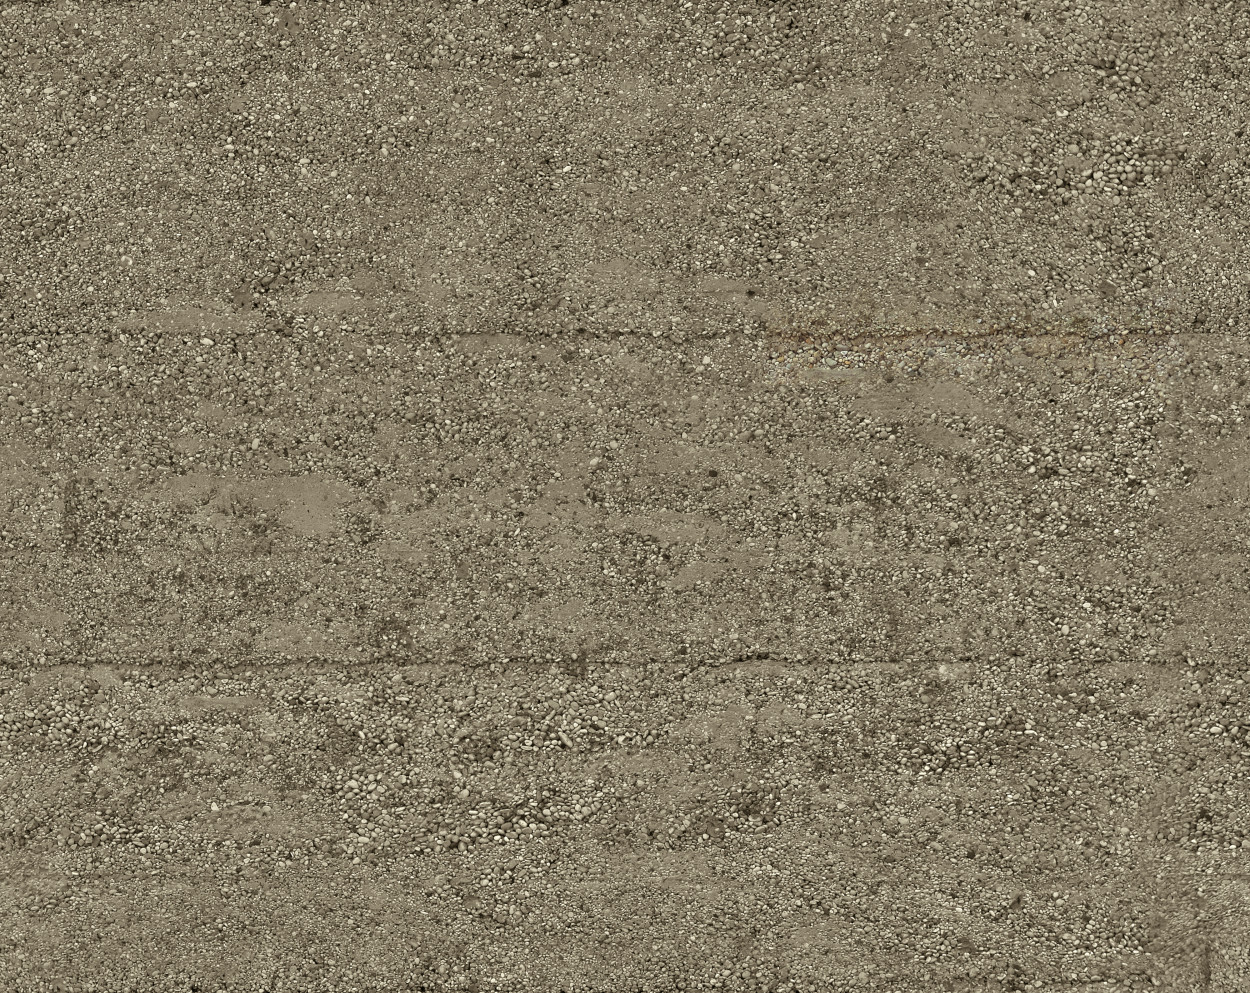 A seamless rough concrete texture for use in architectural drawings and 3D models